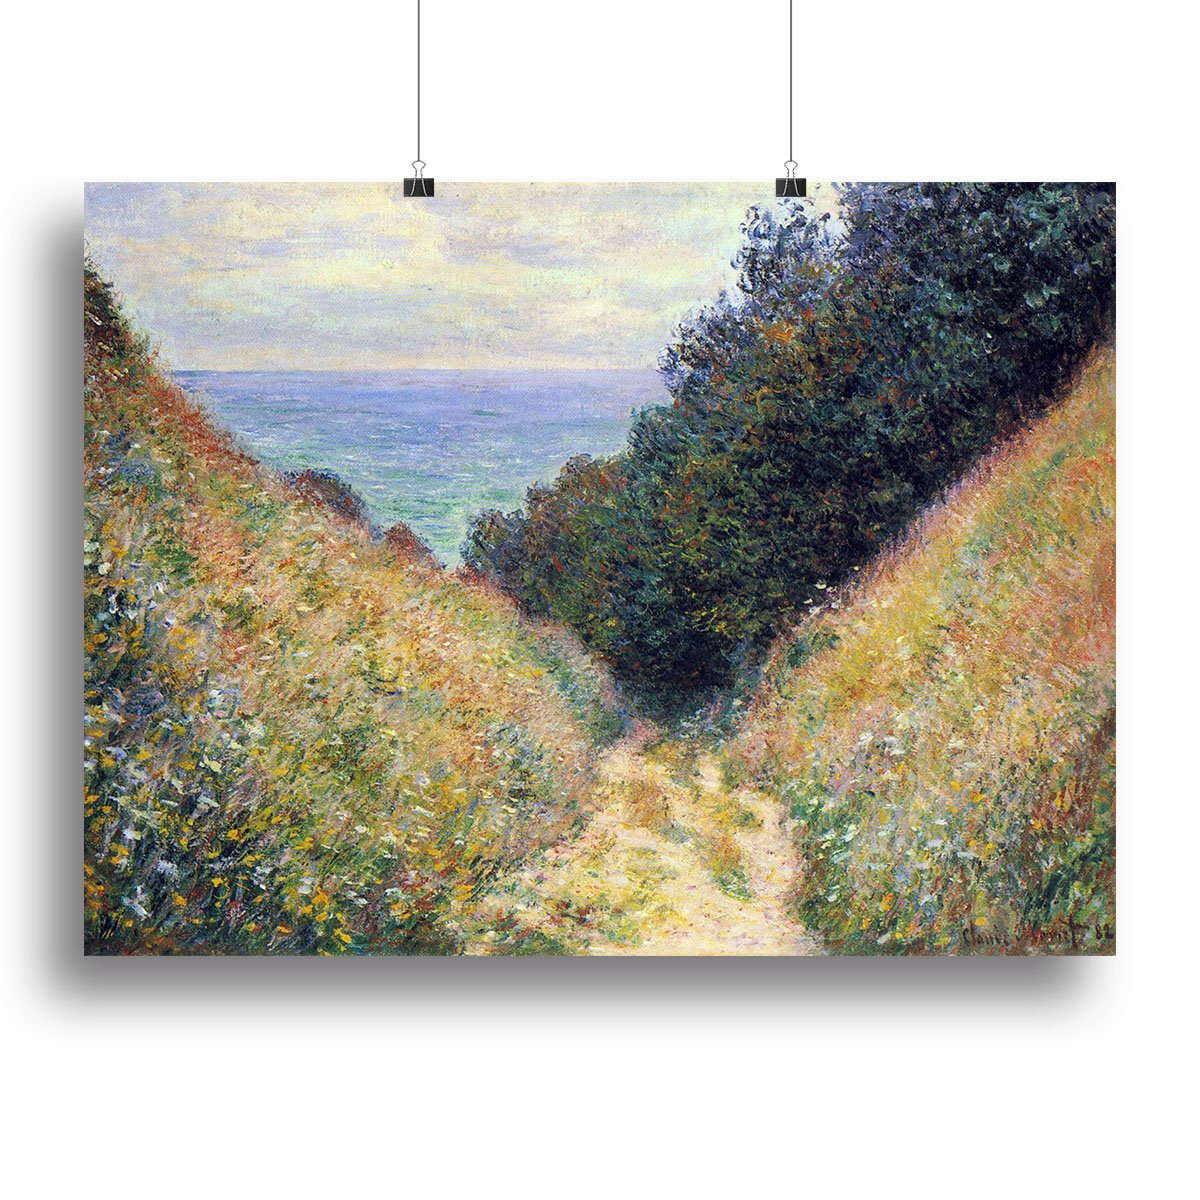 Pourville 1 by Monet Canvas Print or Poster